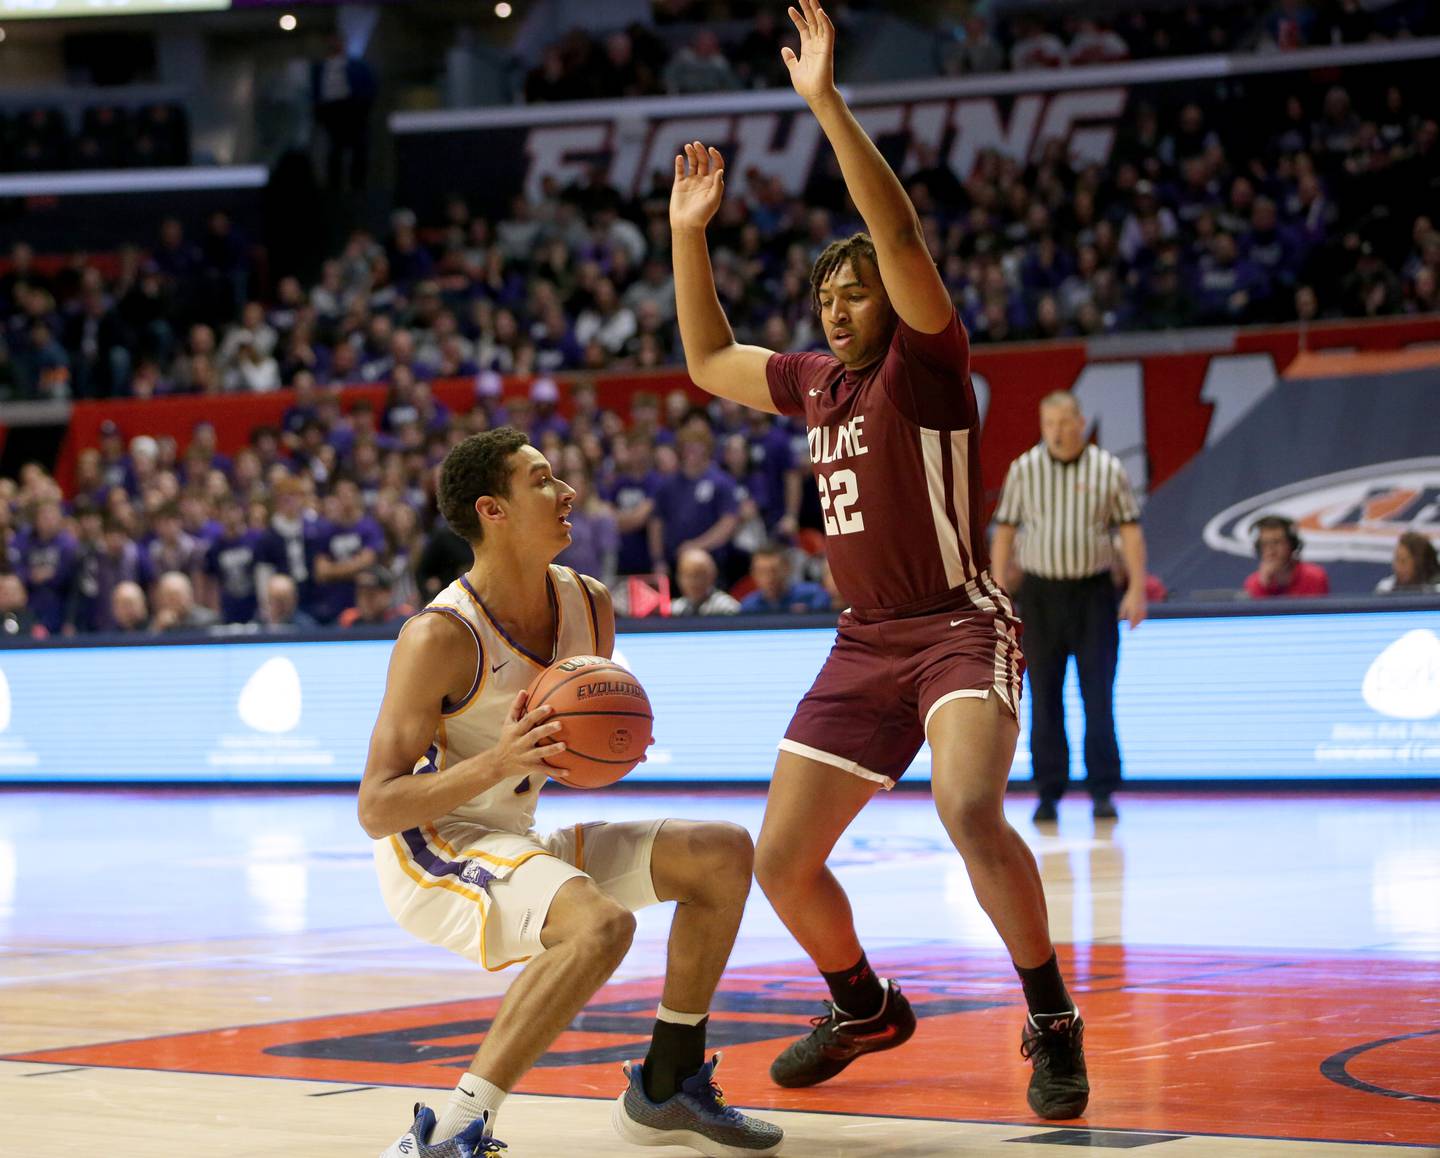 Downers Grove North's Jacob Bozeman is stopped in the lane by Moline's Treyvon Taylor during the Class 4A state semifinal game on Friday, March 10, 2023 in Champaign.